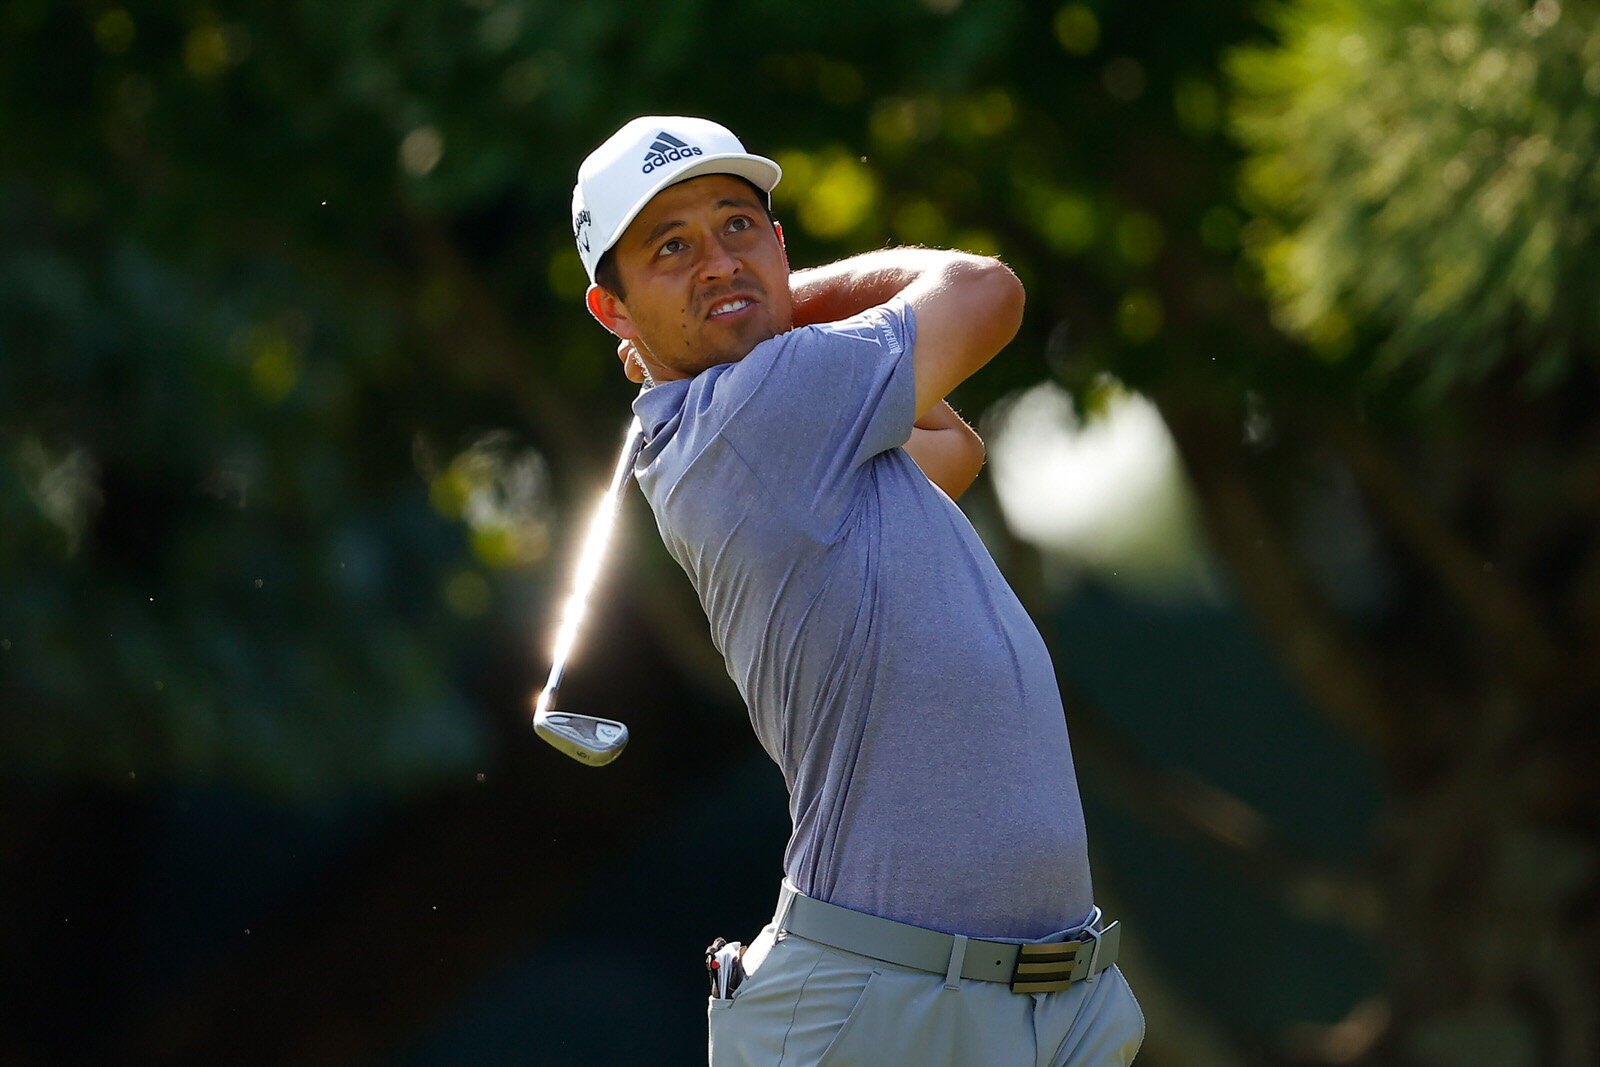  ATLANTA, GEORGIA - SEPTEMBER 06: Xander Schauffele of the United States plays his shot from the 11th tee during the third round of the TOUR Championship at East Lake Golf Club on September 06, 2020 in Atlanta, Georgia. (Photo by Kevin C. Cox/Getty I